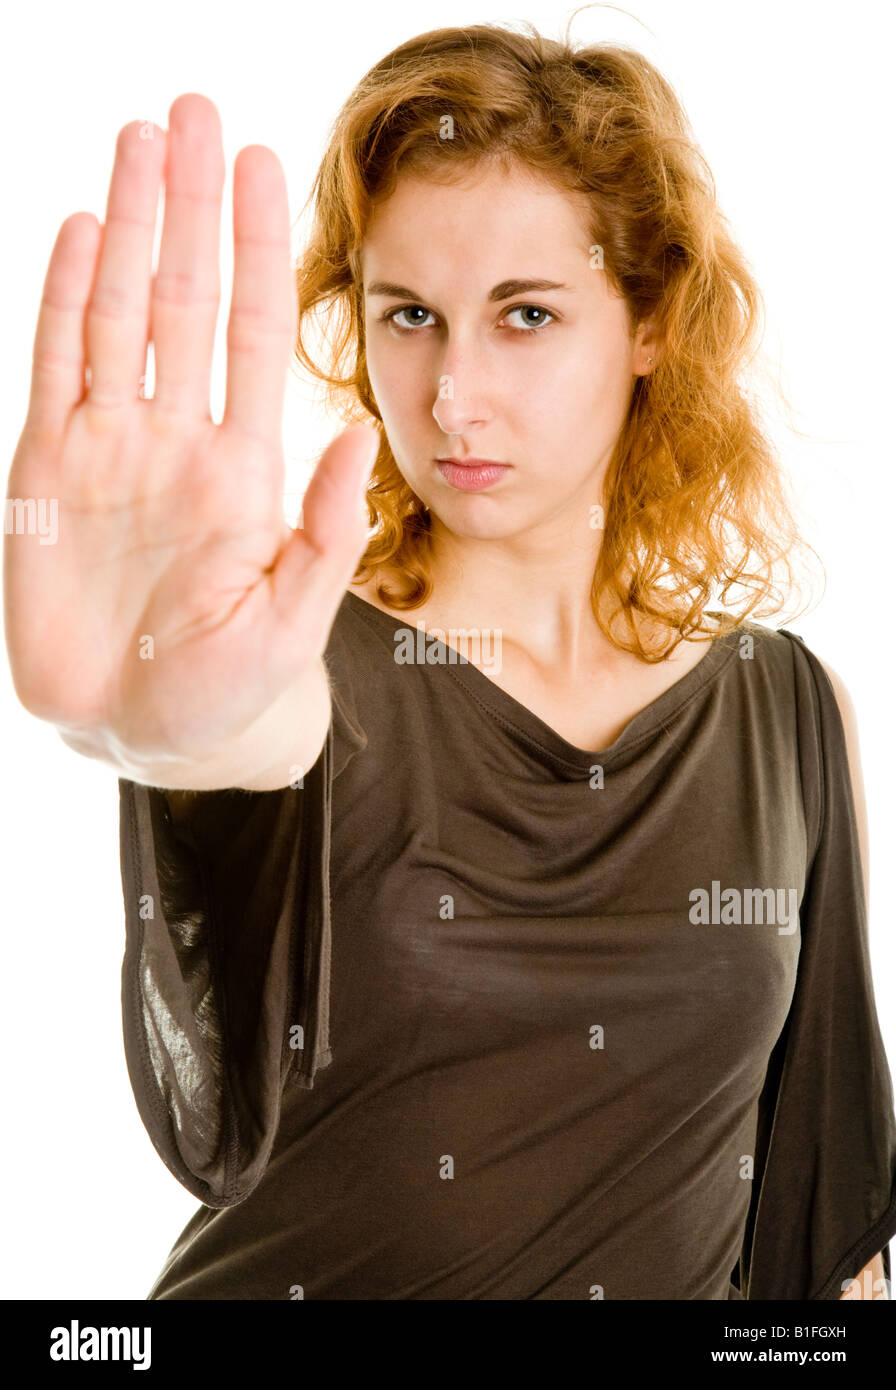 young woman put out her hands Stock Photo